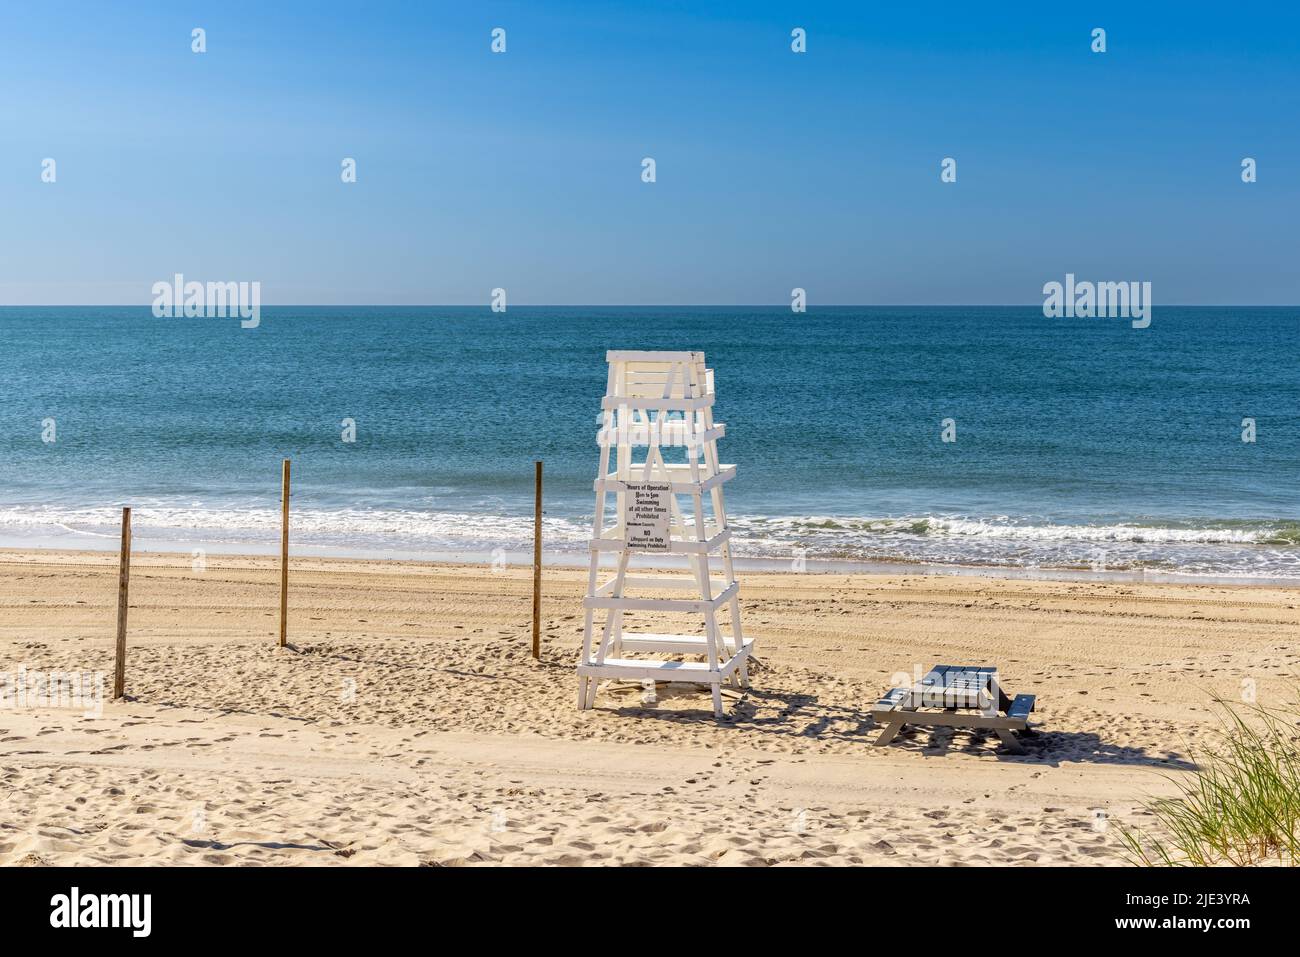 Life guard stand on an early morning in Montauk Stock Photo